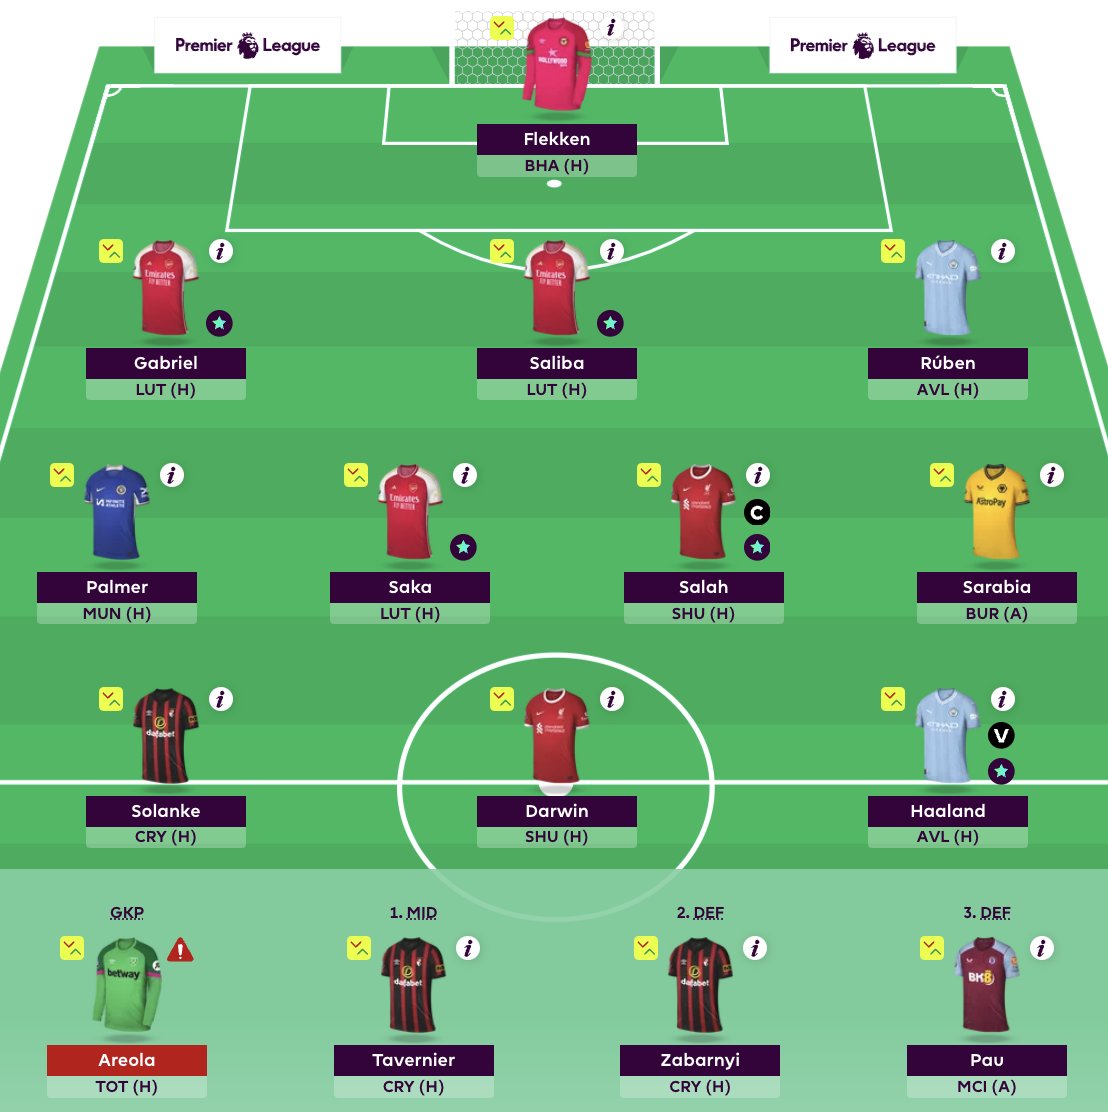 Unless something unexpected happens I'm lining up like this for GW 31. I did Watkins, Son, Foden -> Darwin, Salah, Sarabia for a -4. Darwin's minutes might be a bit dicey for 31, but now was the only reasonable time to buy him. The team looks good for now. Good luck!